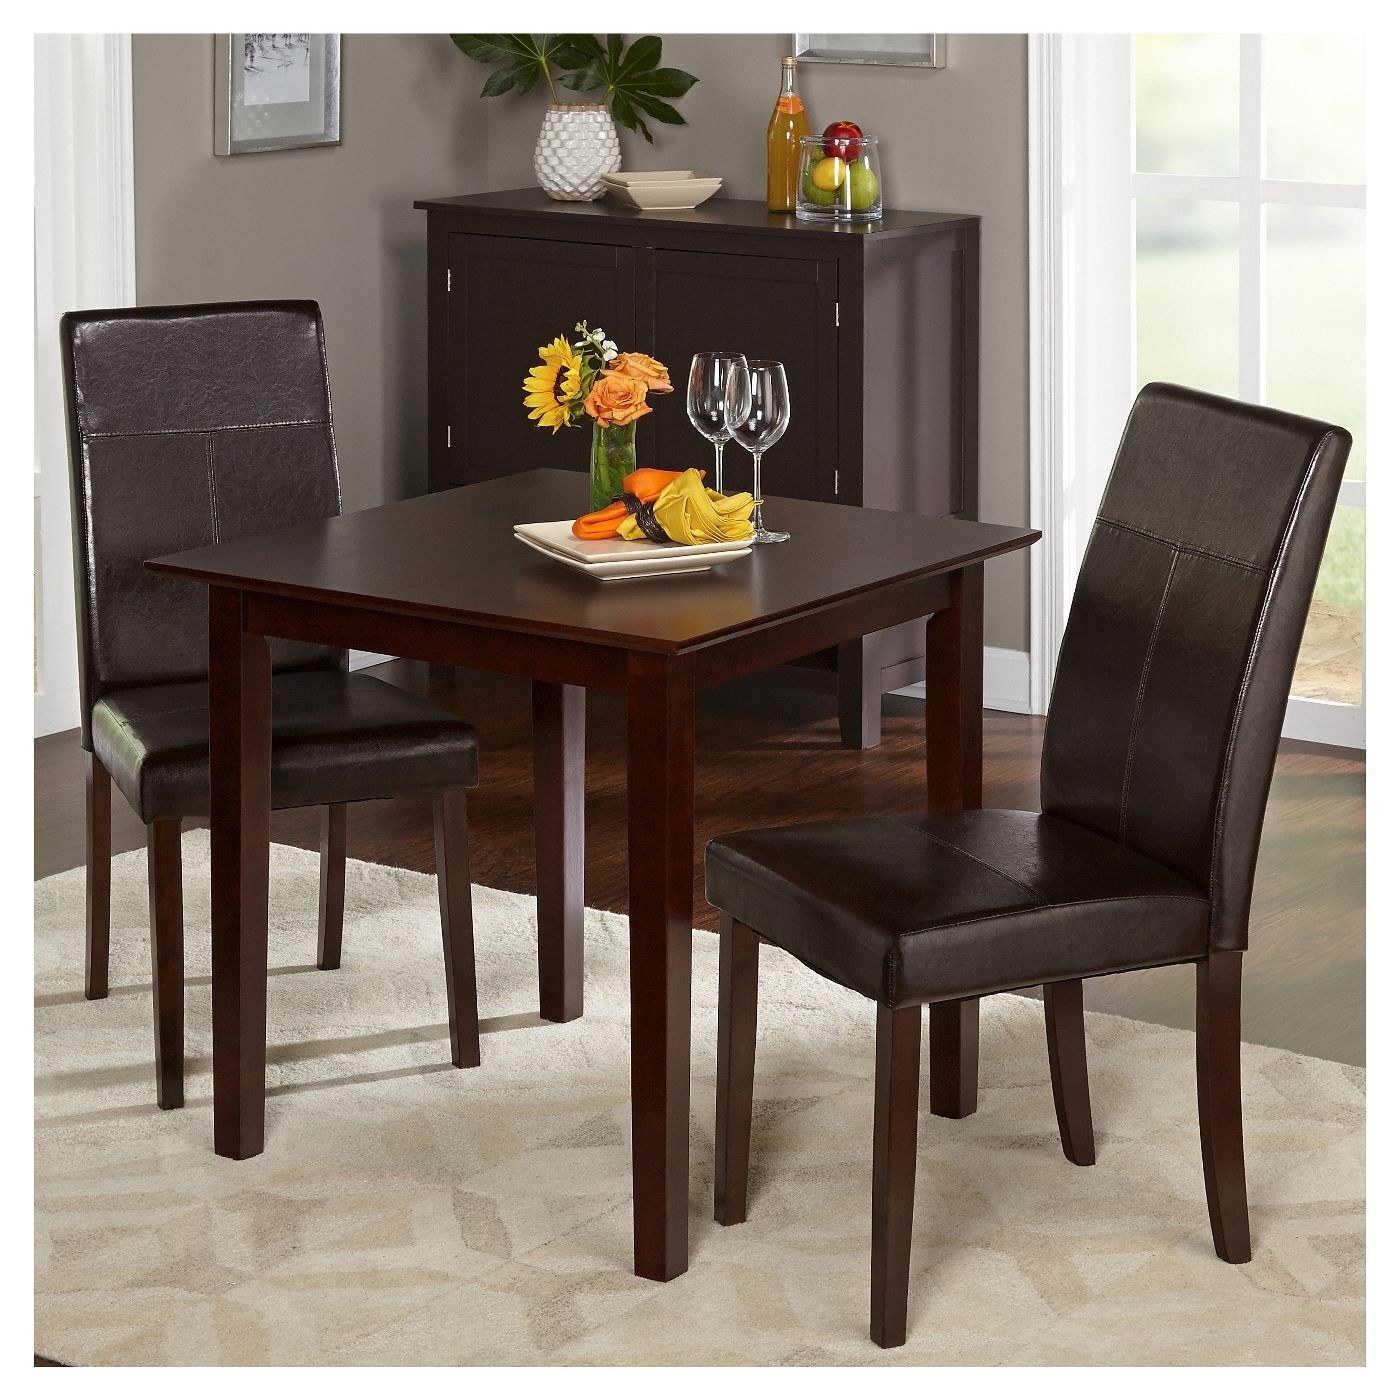 A dark brown table with chairs in home